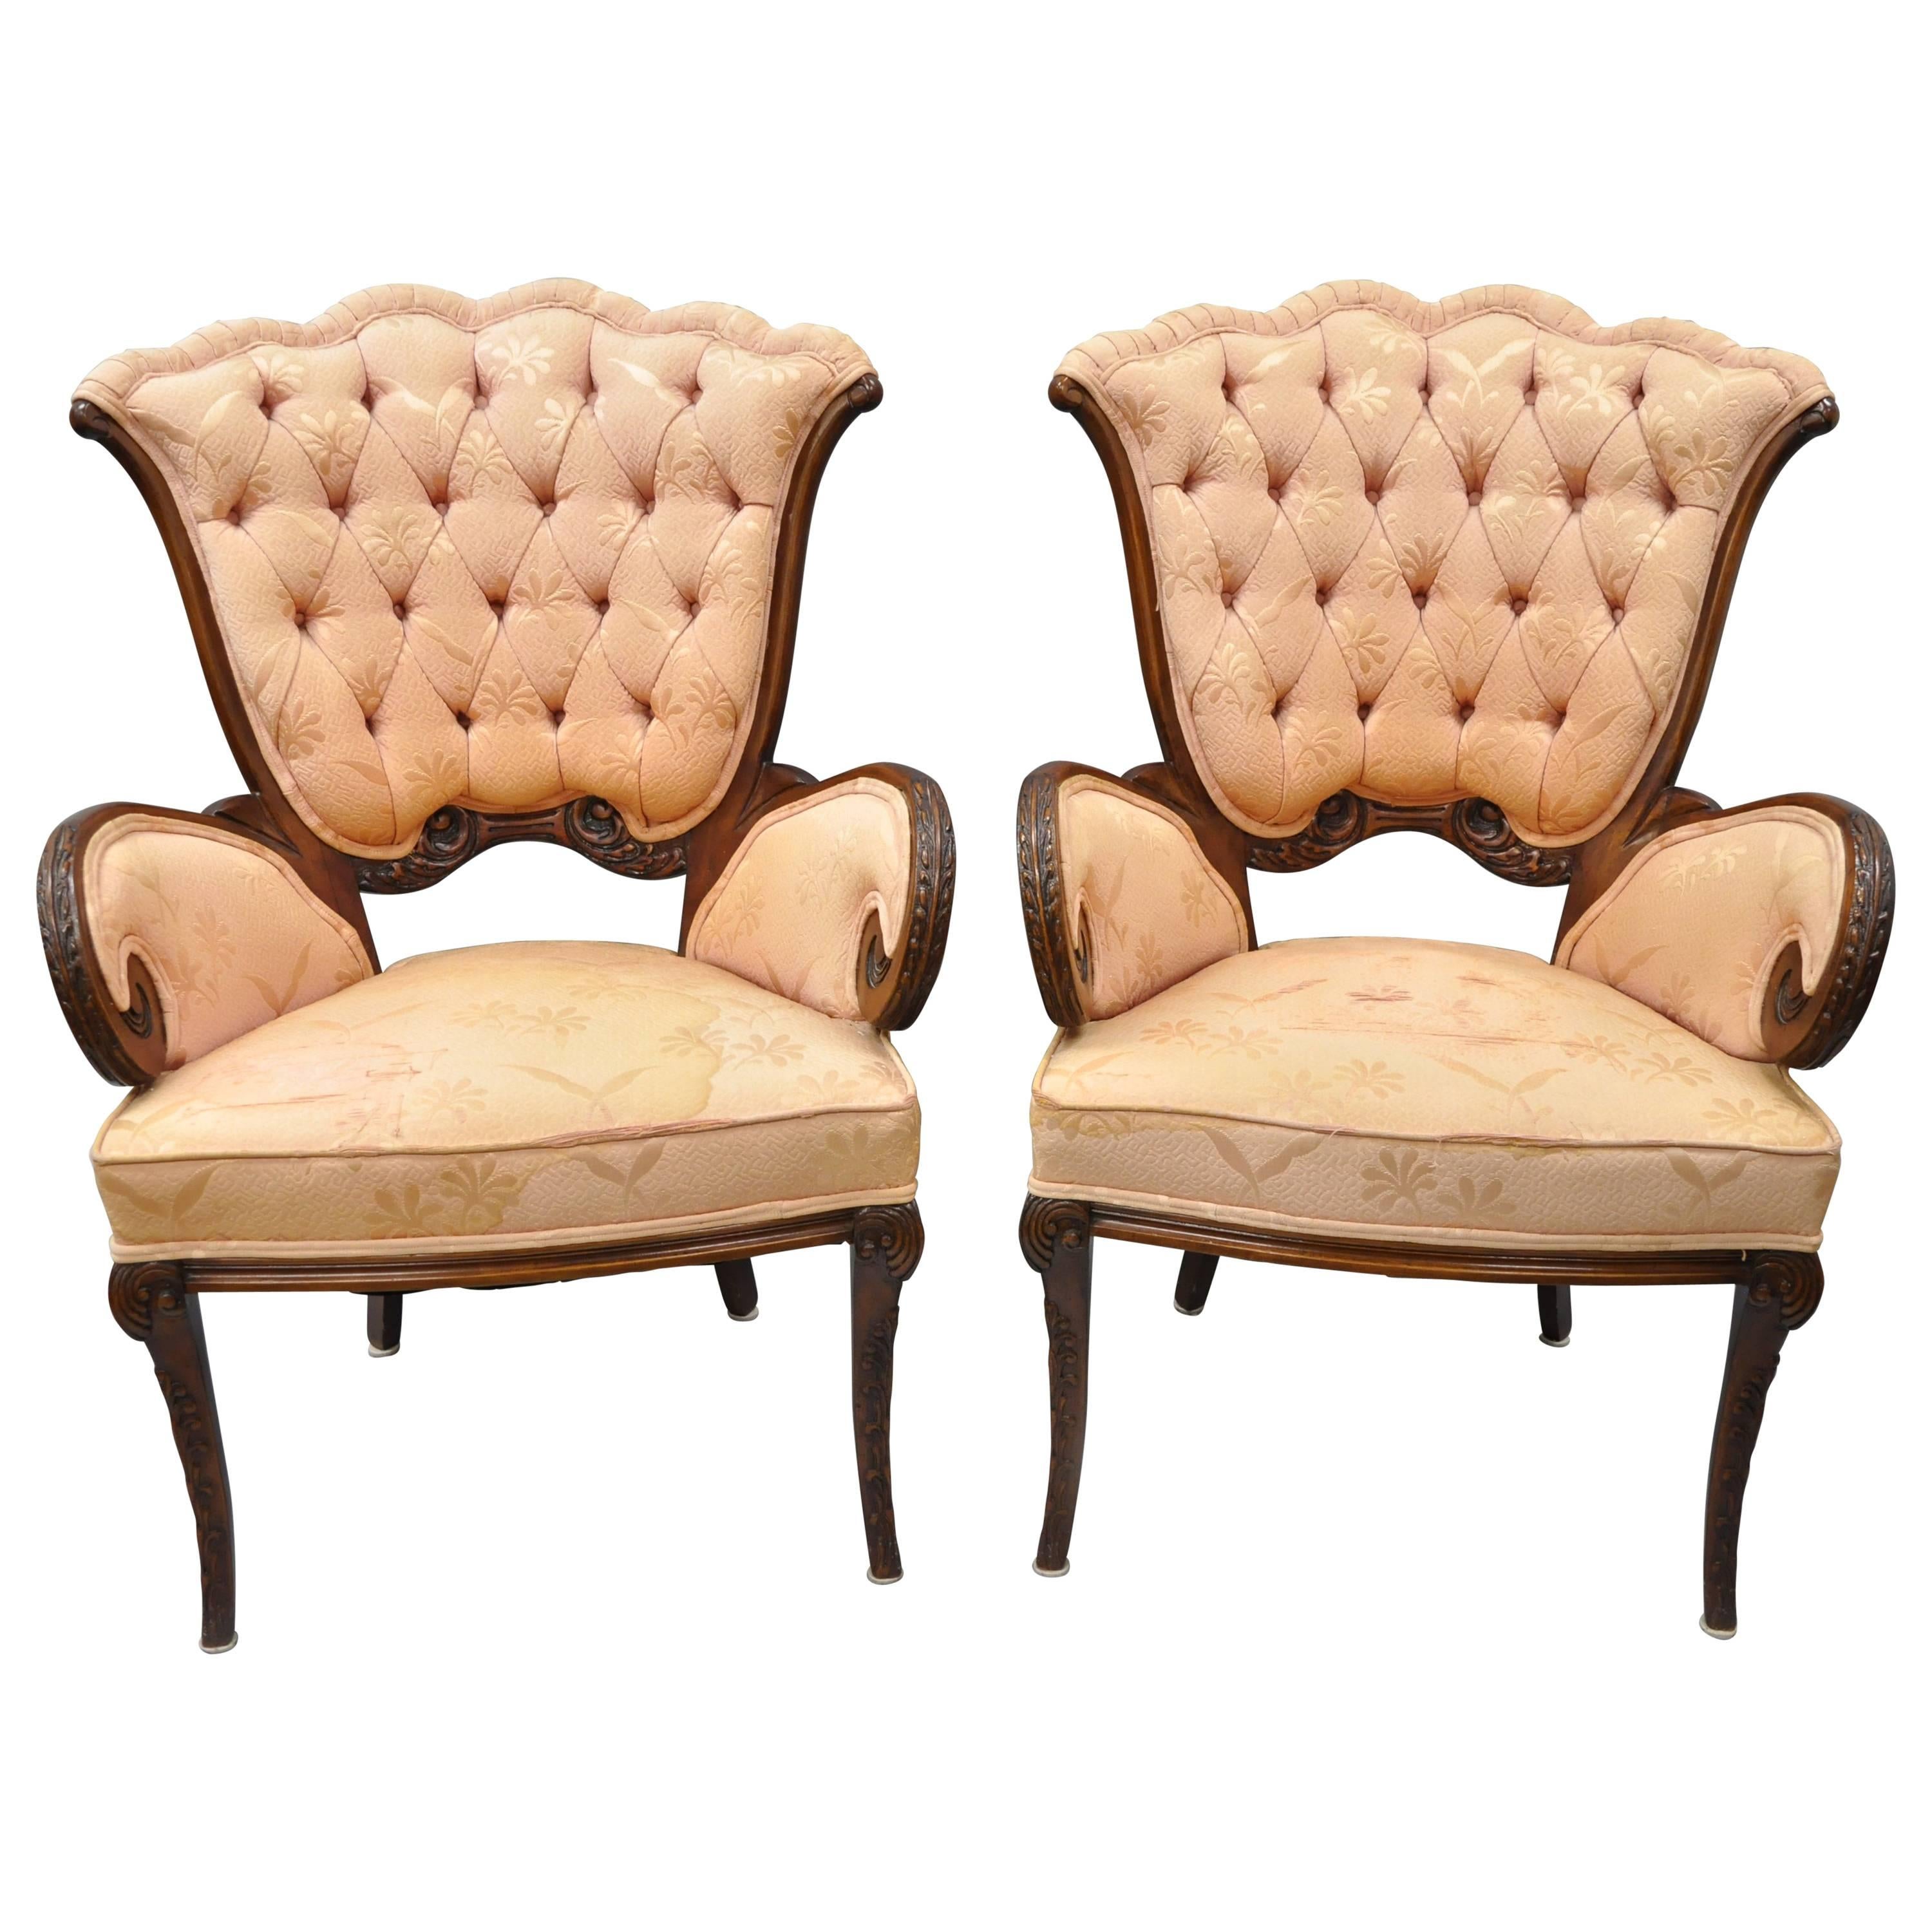 Pair of Mahogany Hollywood Regency Tufted Armchairs Attributed to Grosfeld House